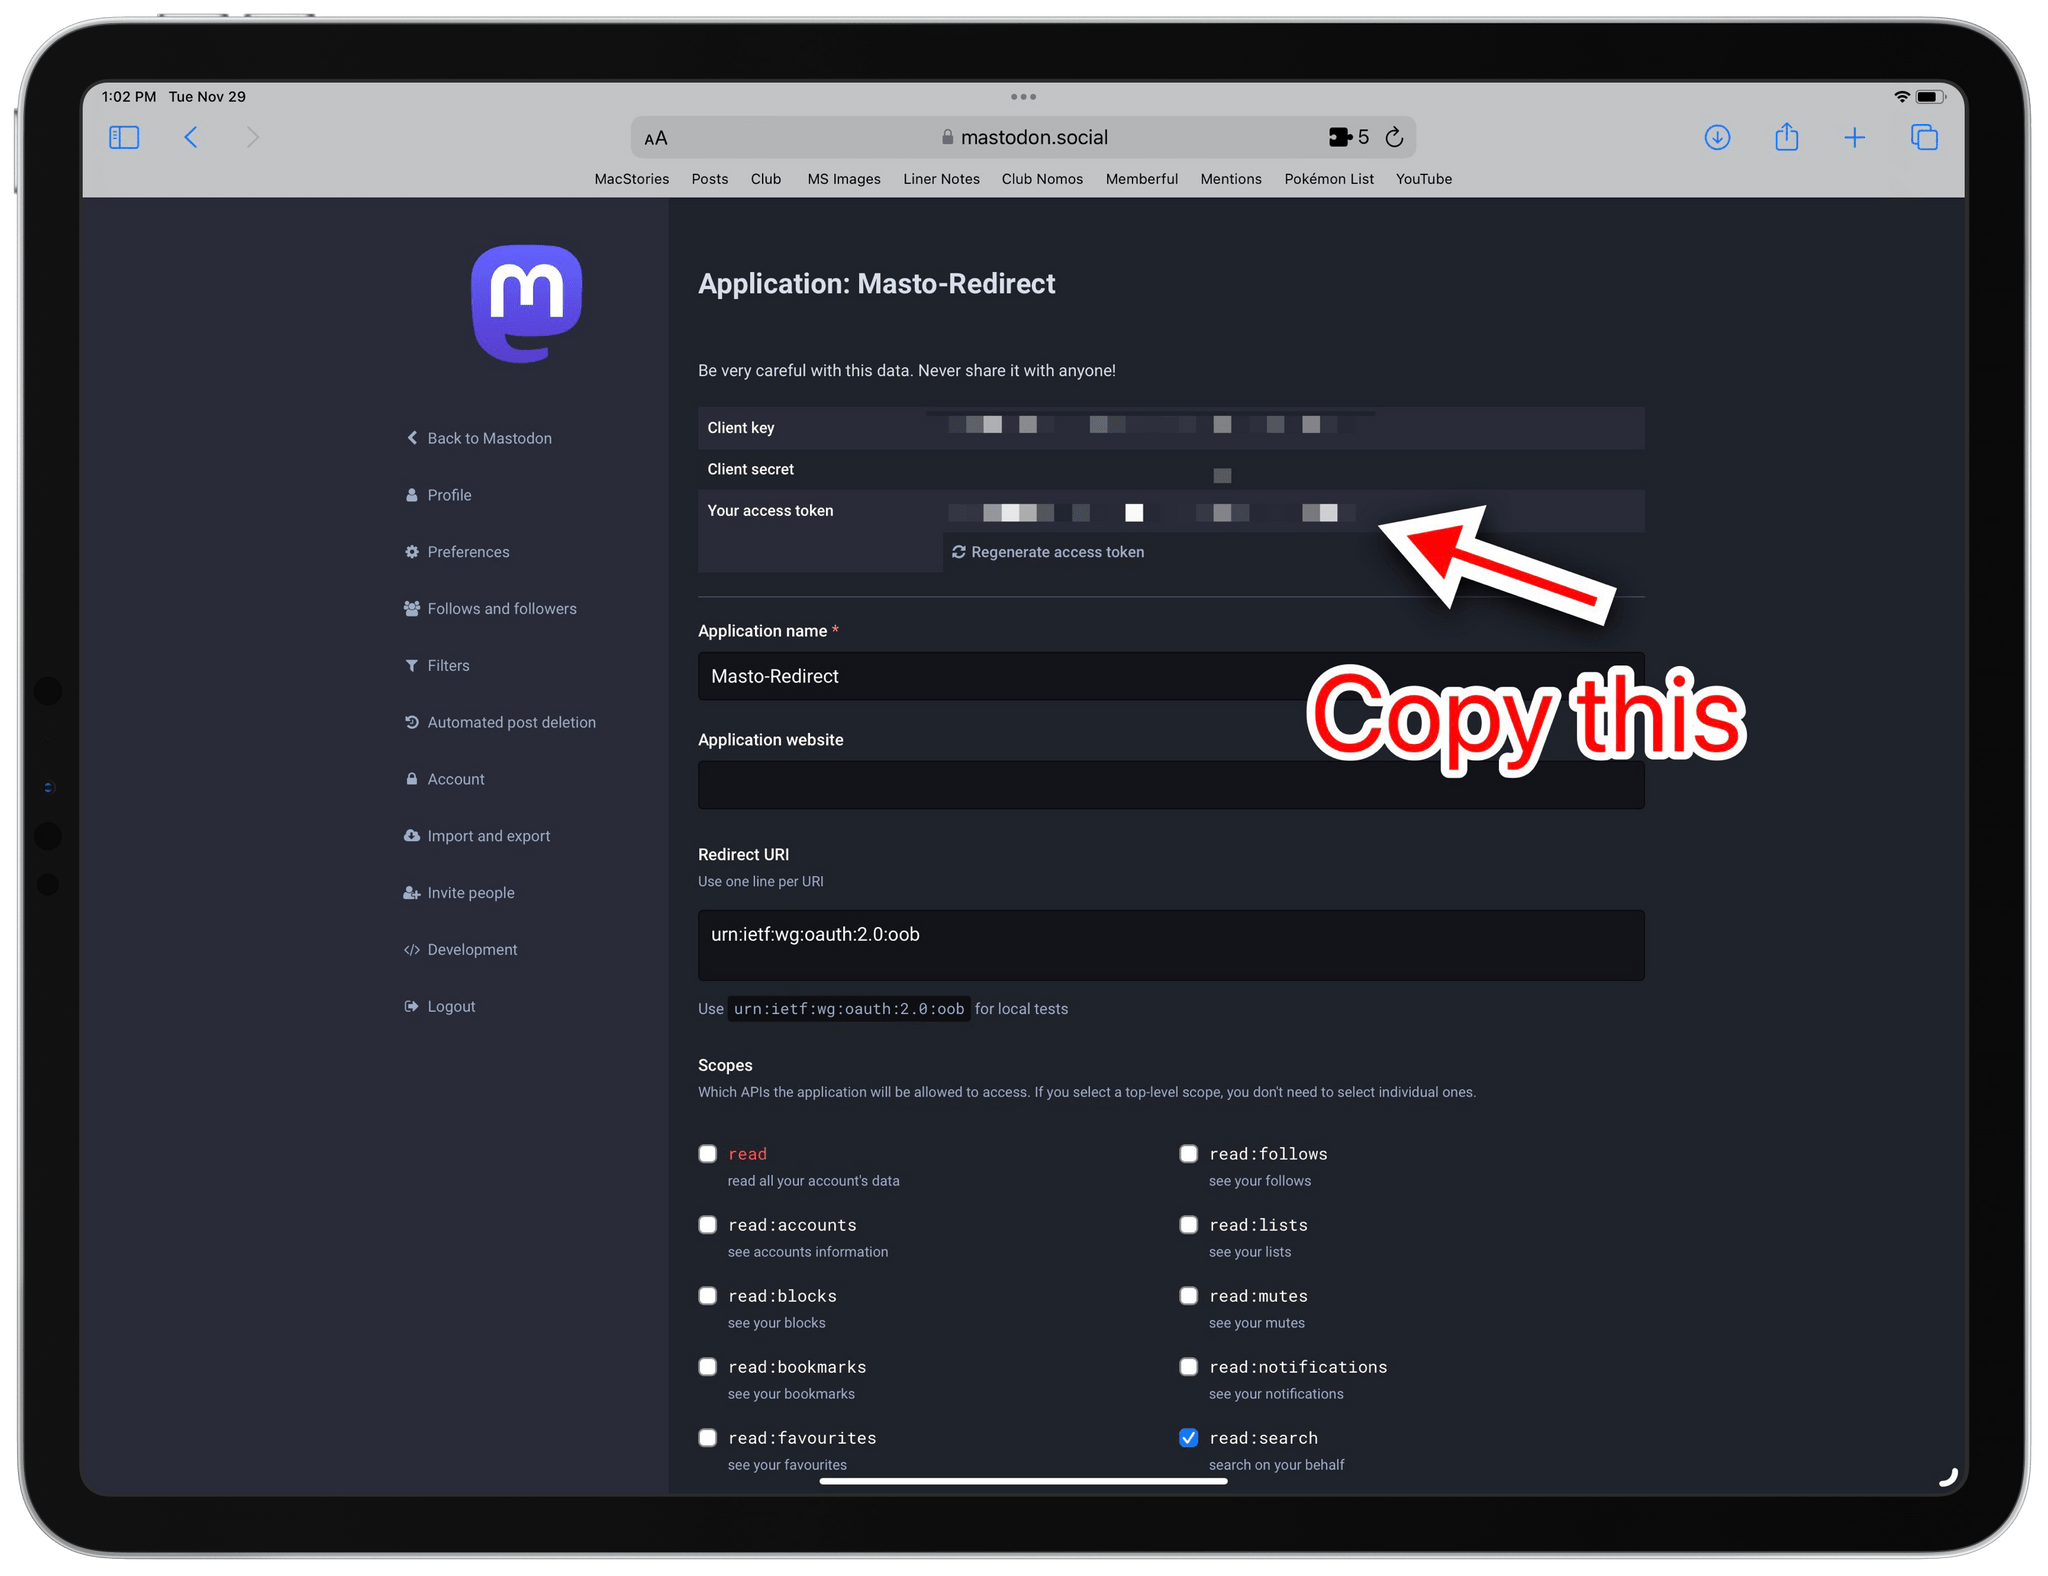 Copy the access token, which you'll have to paste in Shortcuts.